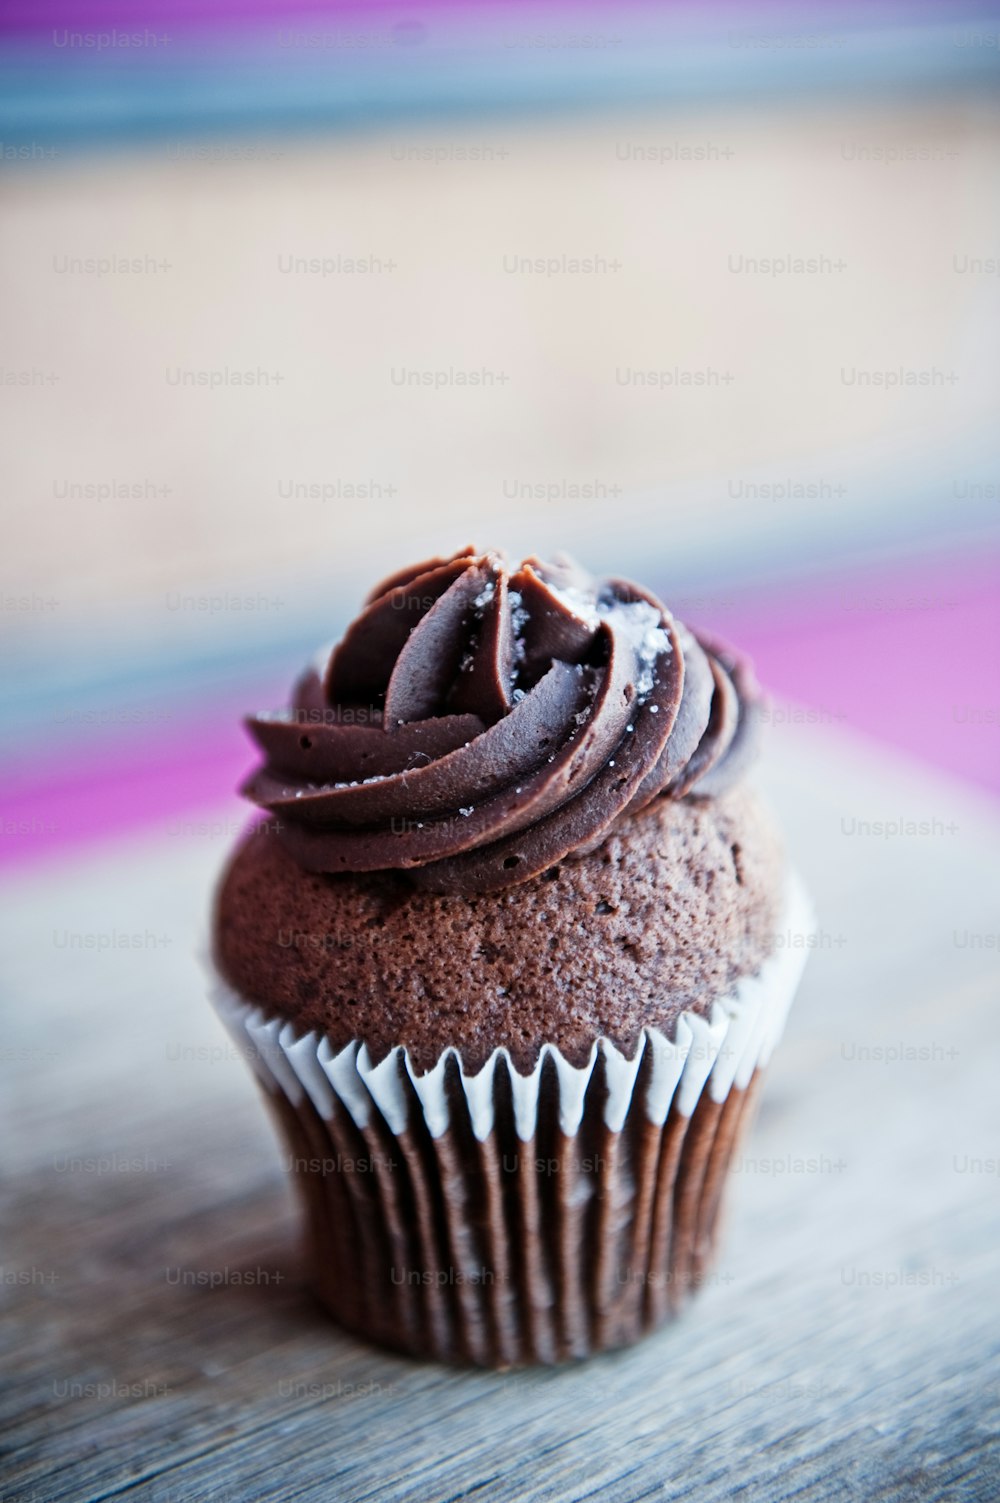 A cupcake with icing is seen